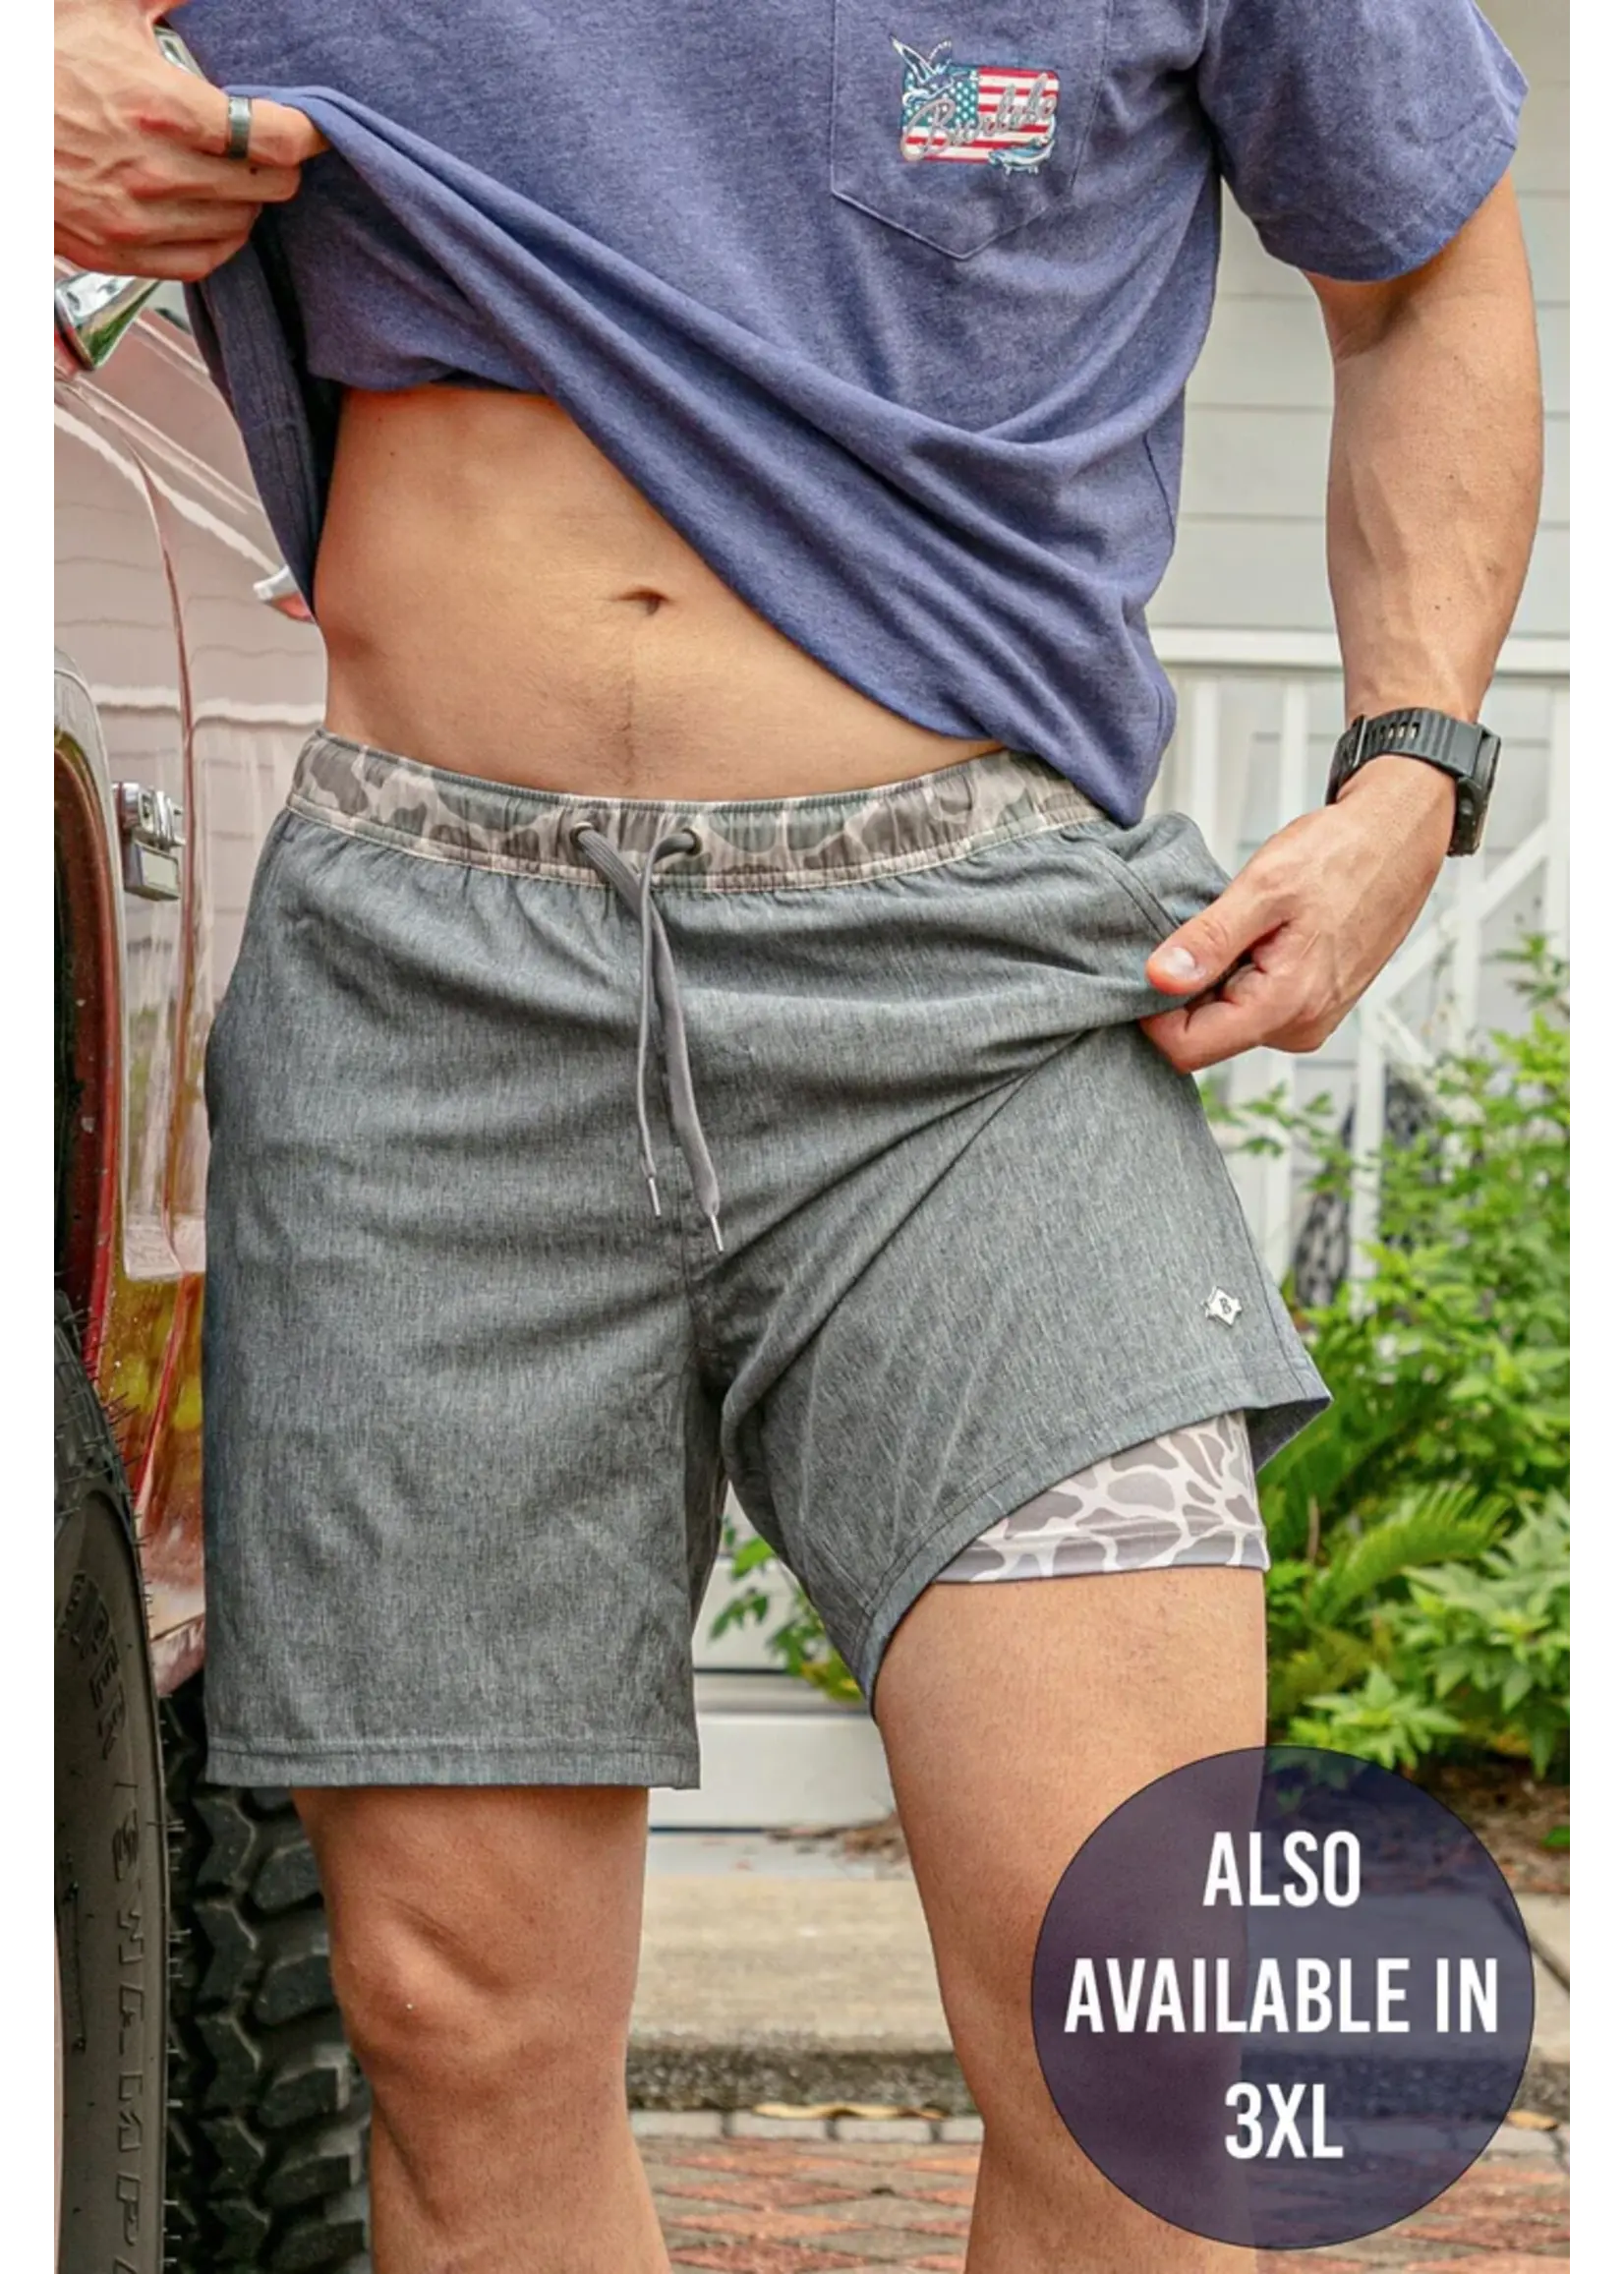 BURLEBO Athletic Shorts - Classic Deer Camo Liner